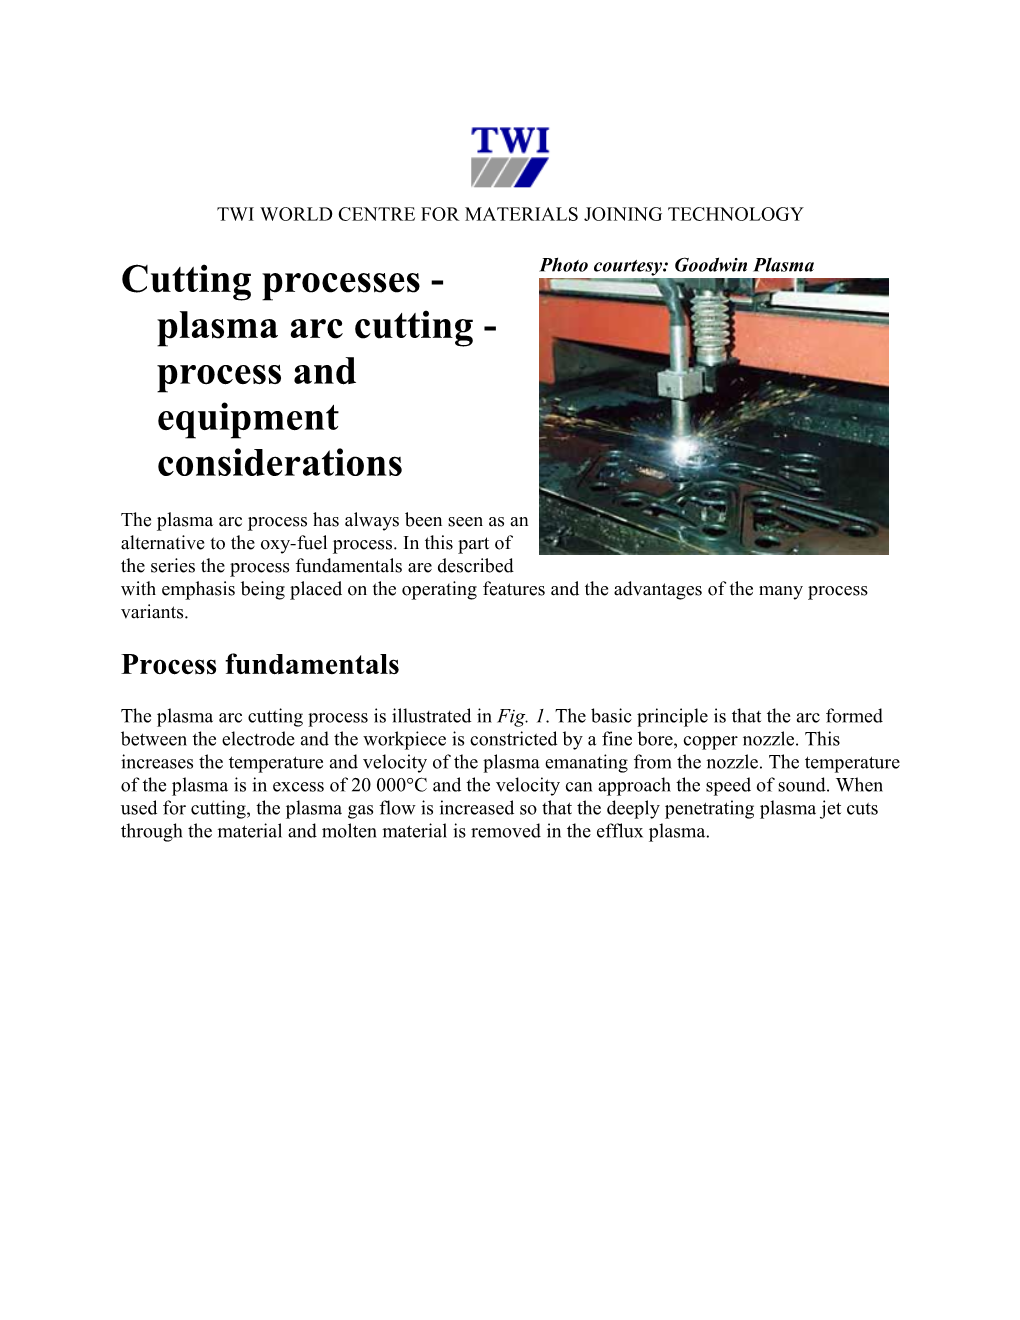 Cutting Processes - Plasma Arc Cutting - Process and Equipment Considerations